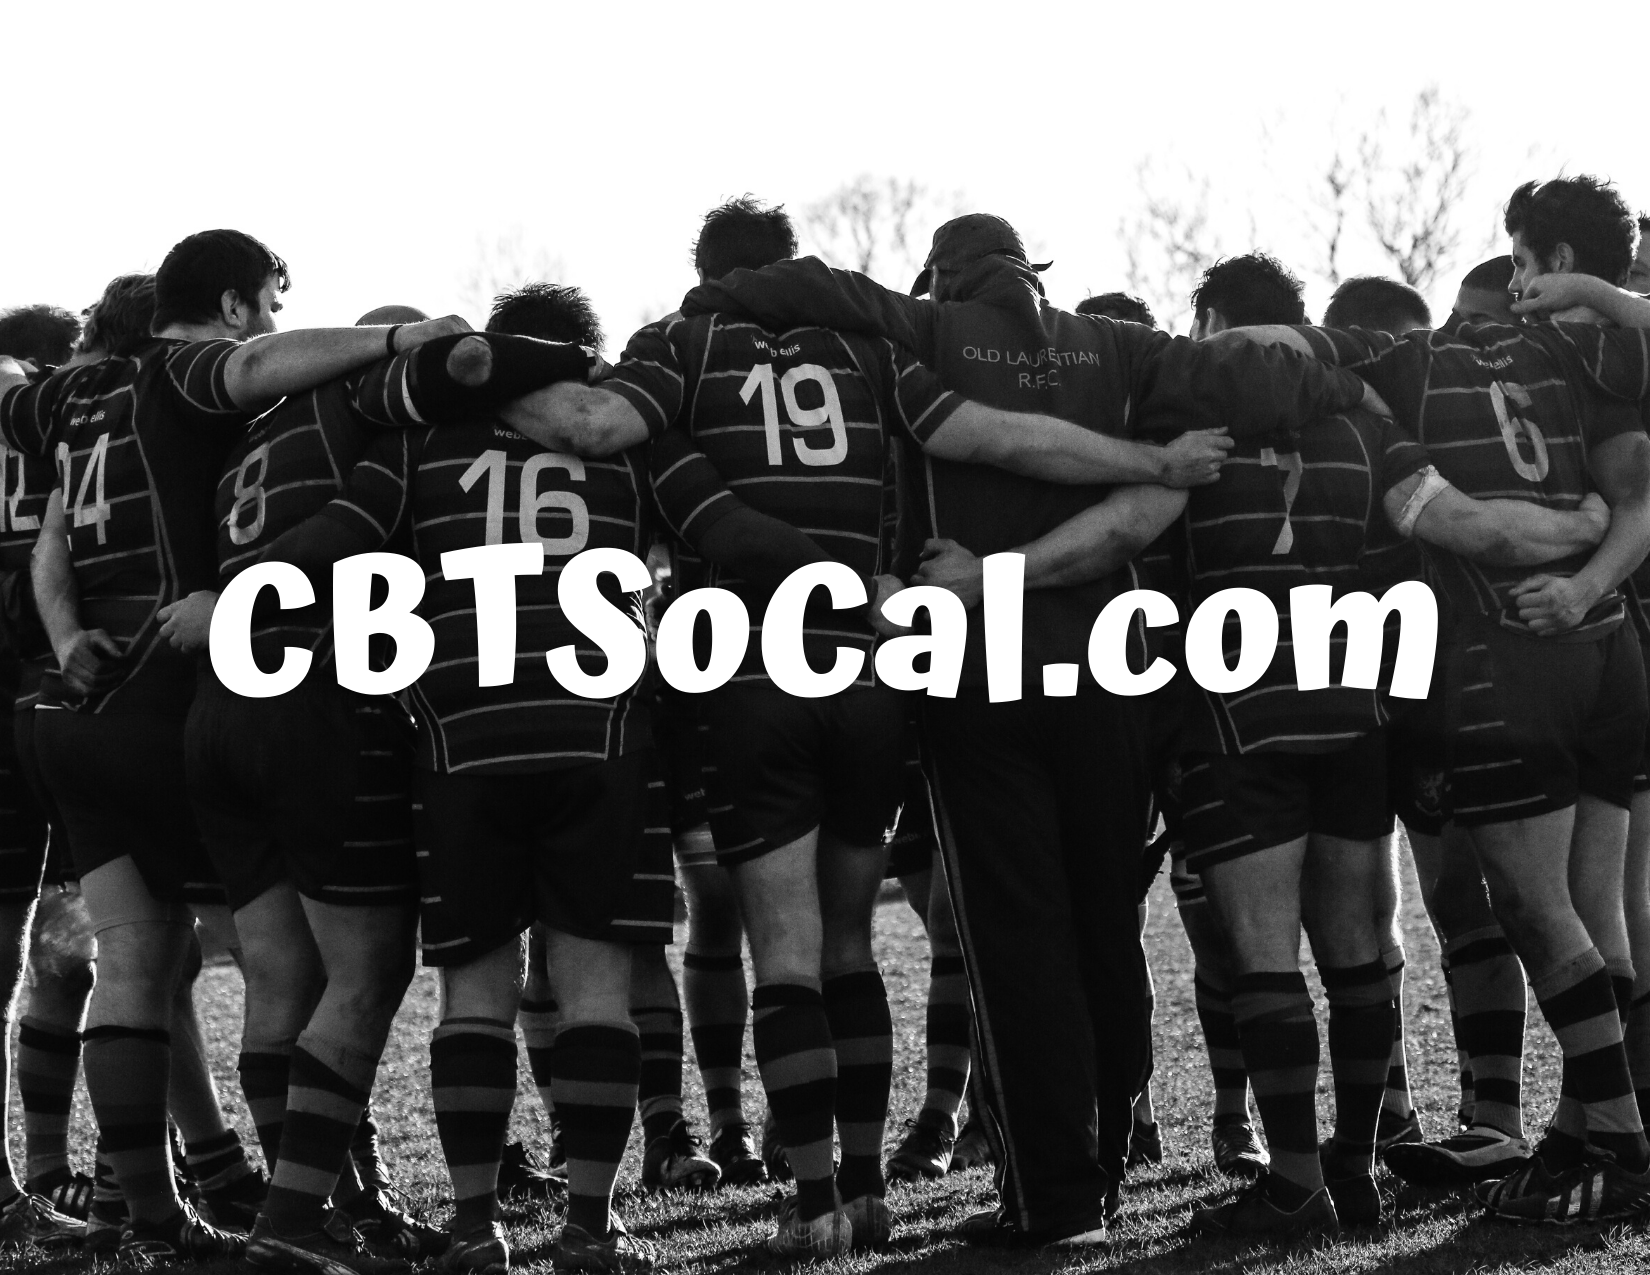 Rugby players huddle together supporting each other mentally and physically